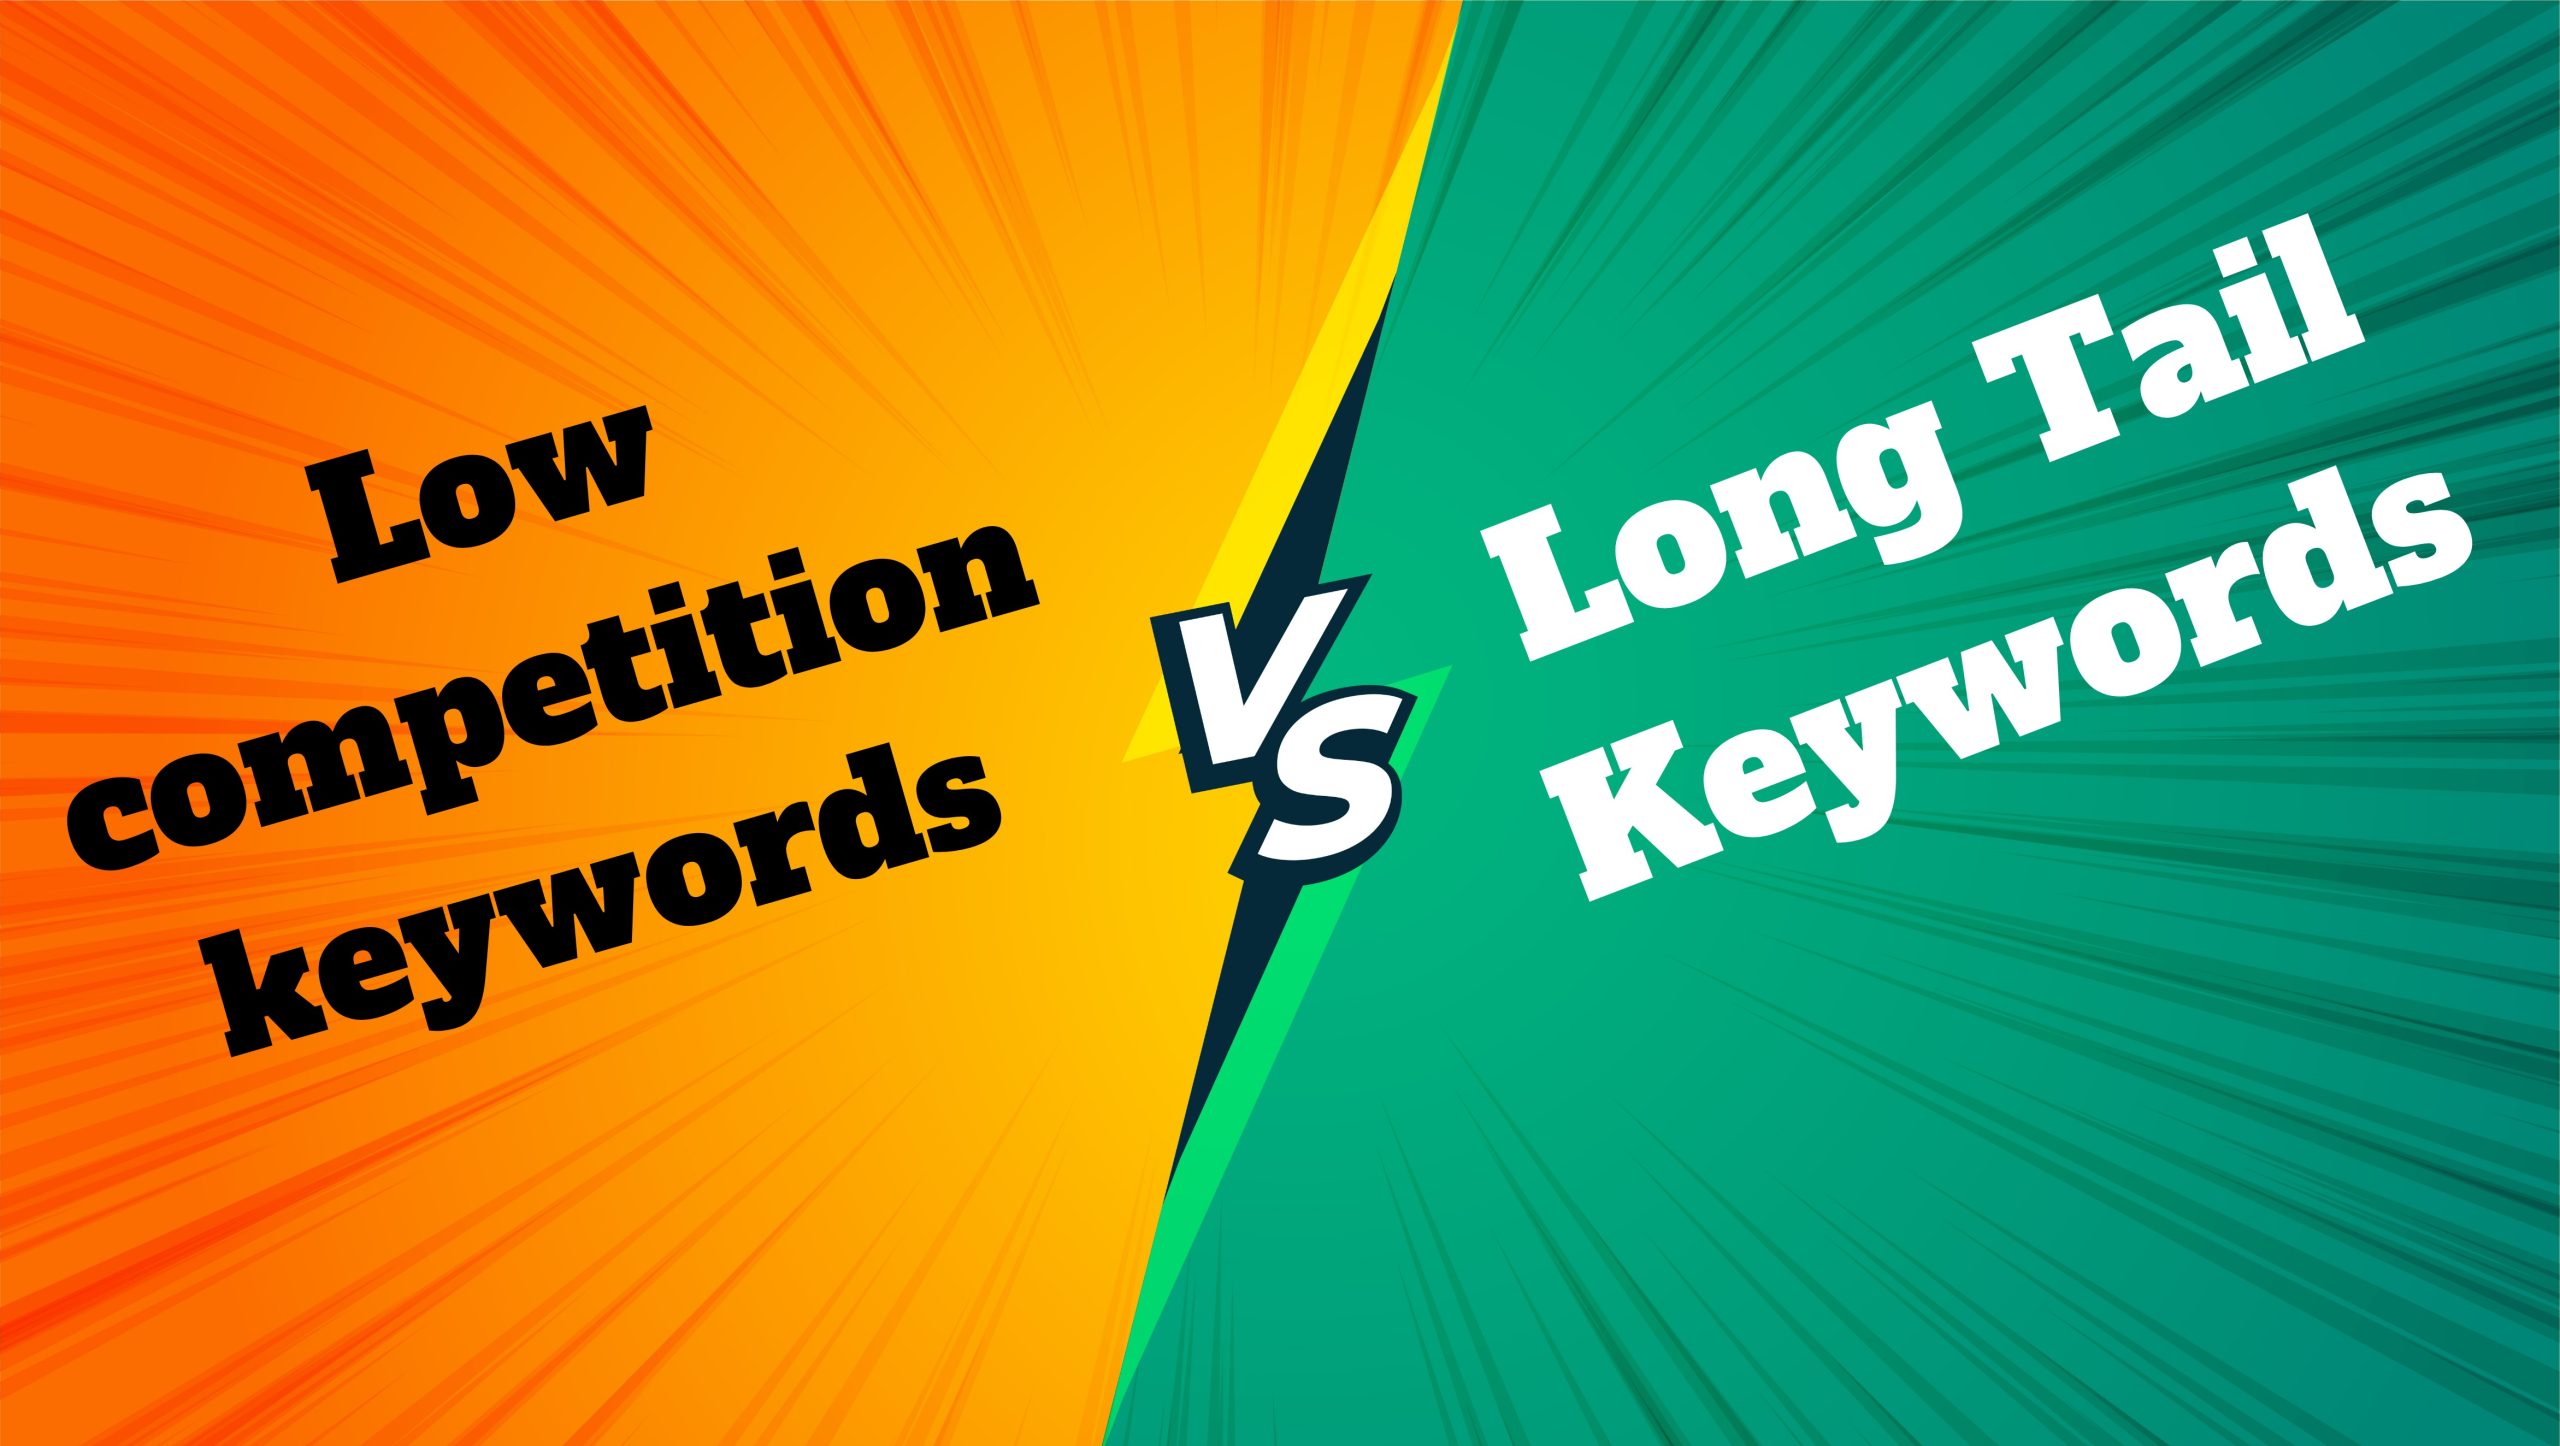 Low competition keyword vs Long Tail keyword which is best for seo - posted by cron24 technologies